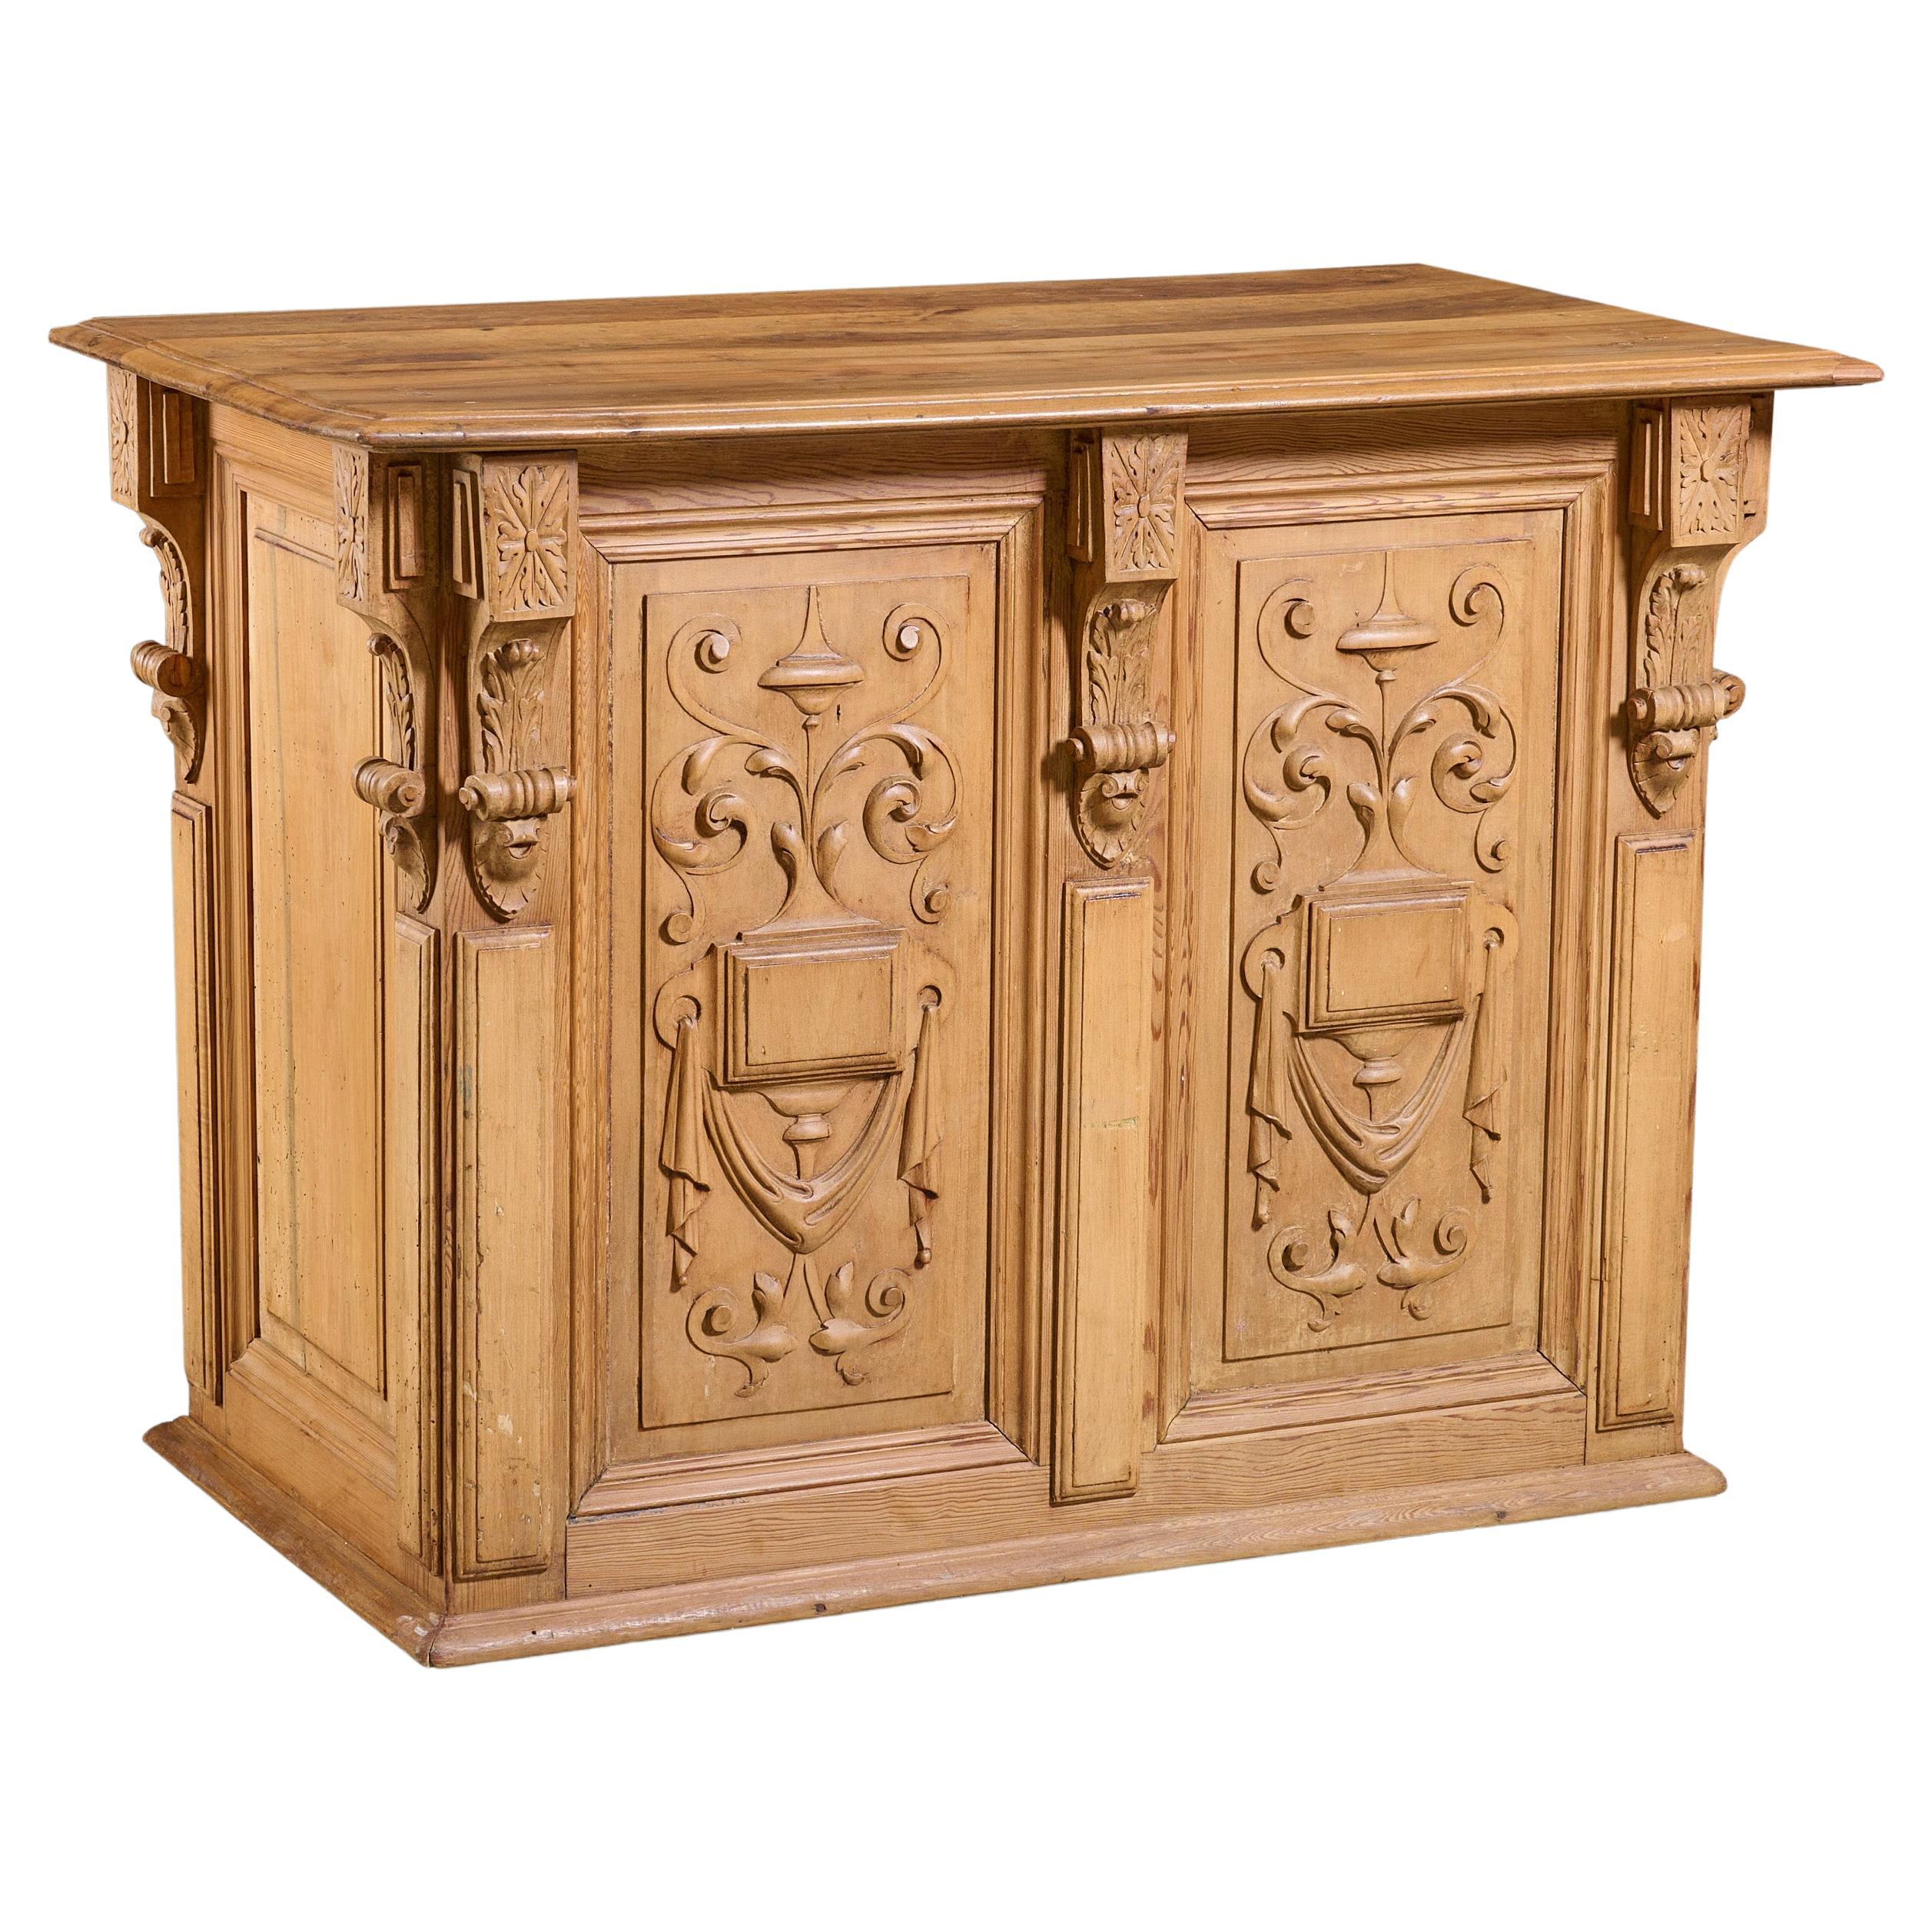 Heavily Carved Wooden Shop Counter For Sale